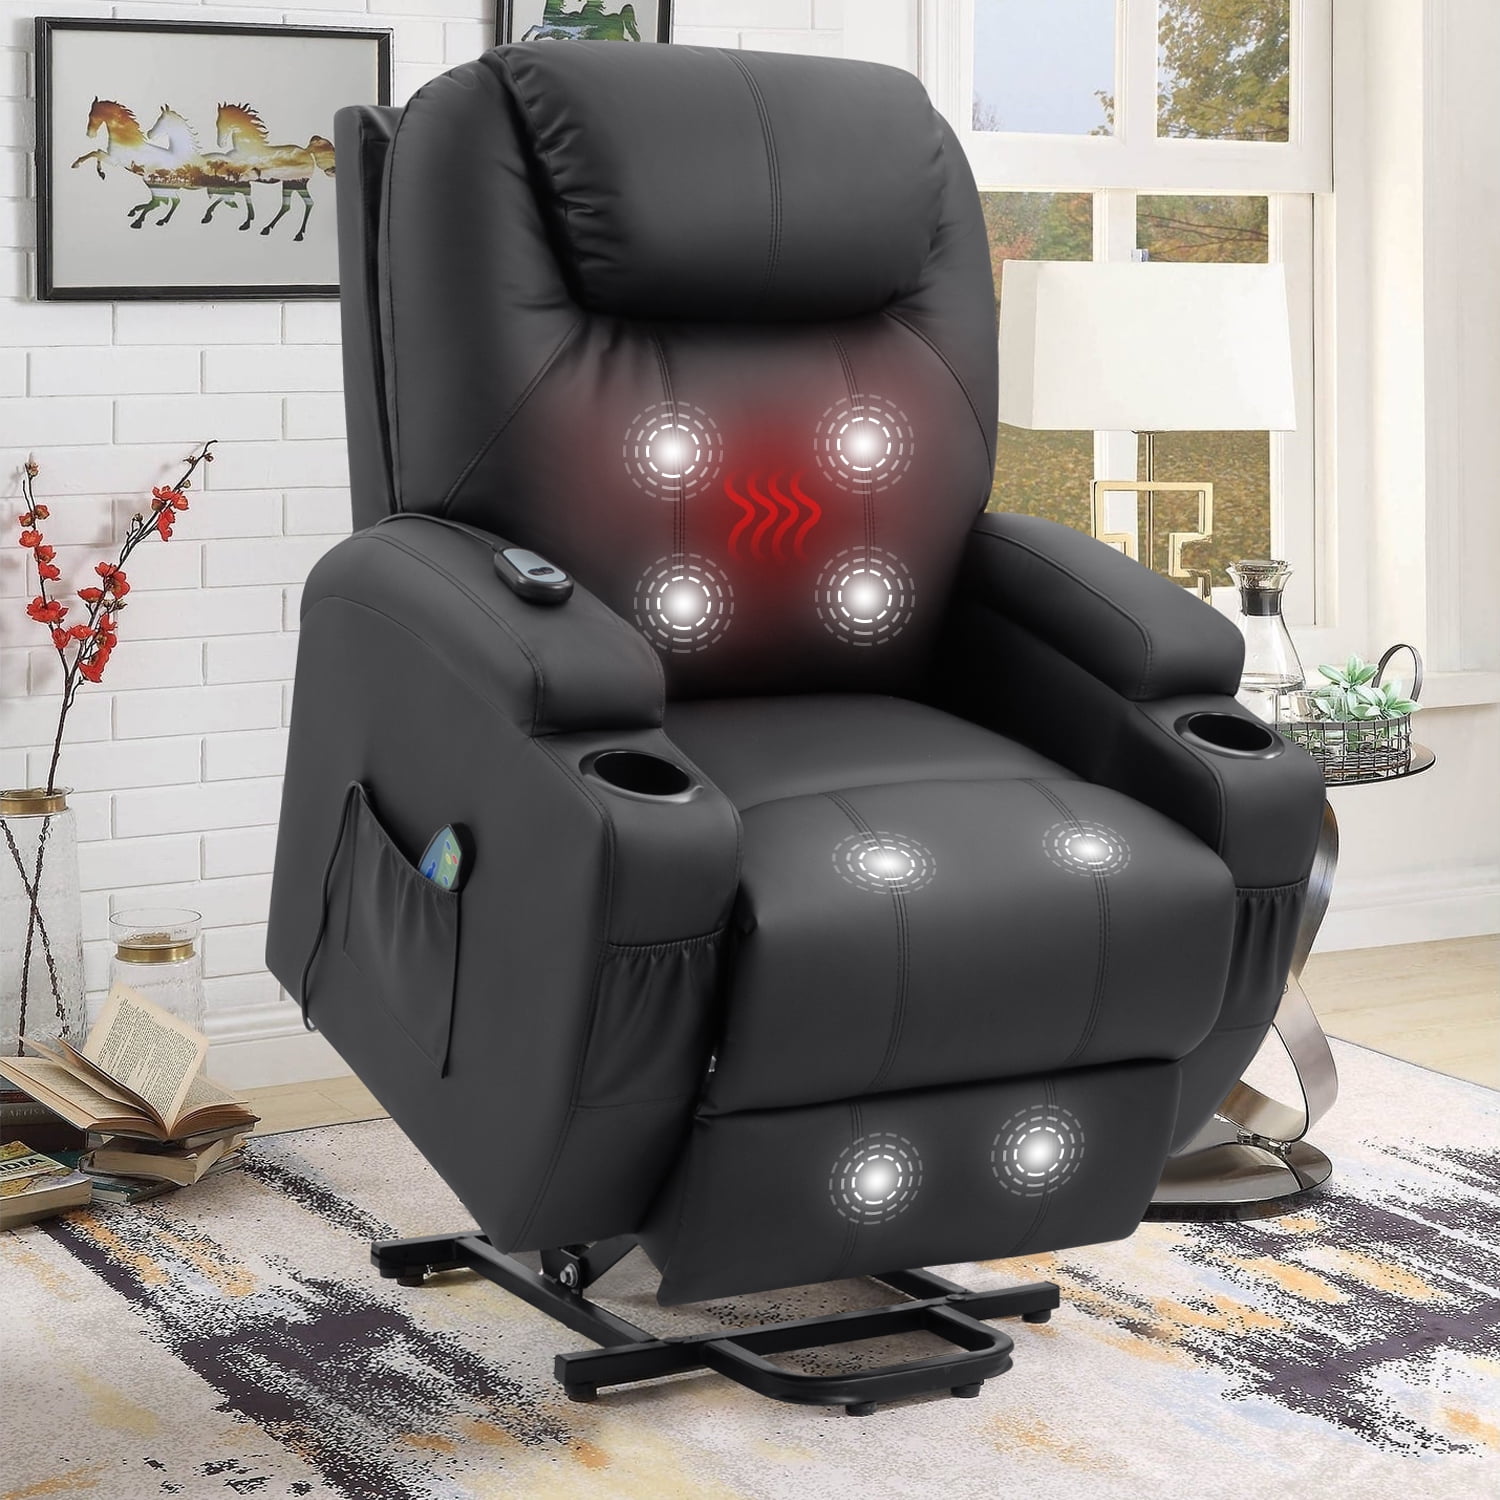 Walnew Power Lift Recliner With Massage, Power Chair Recliner Cover